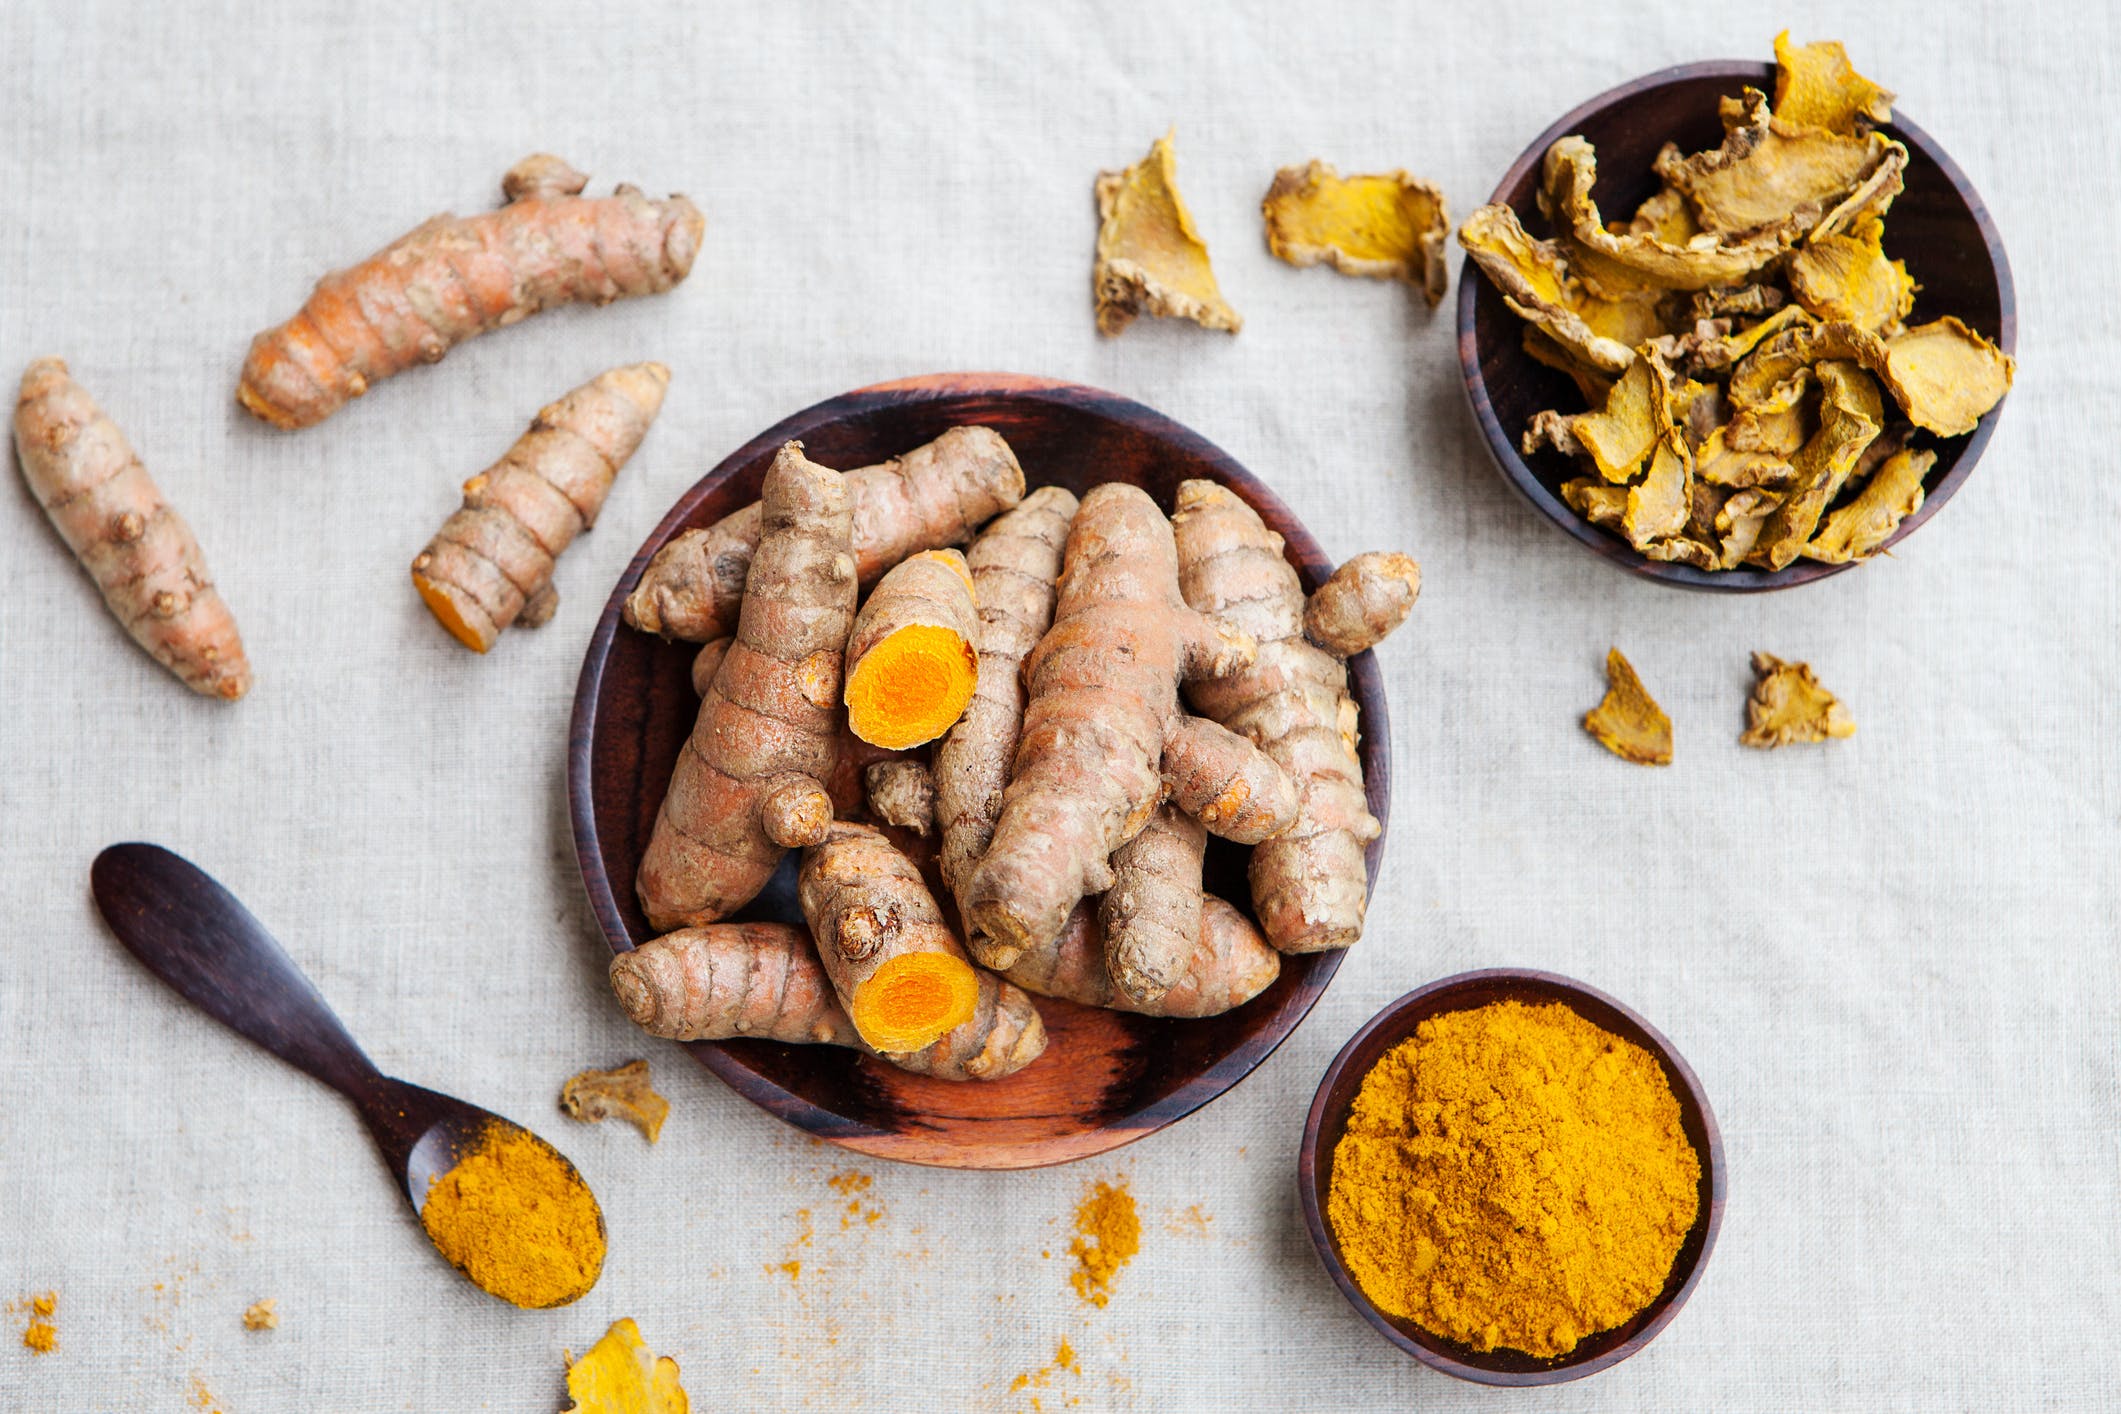 Let’s Talk About Turmeric